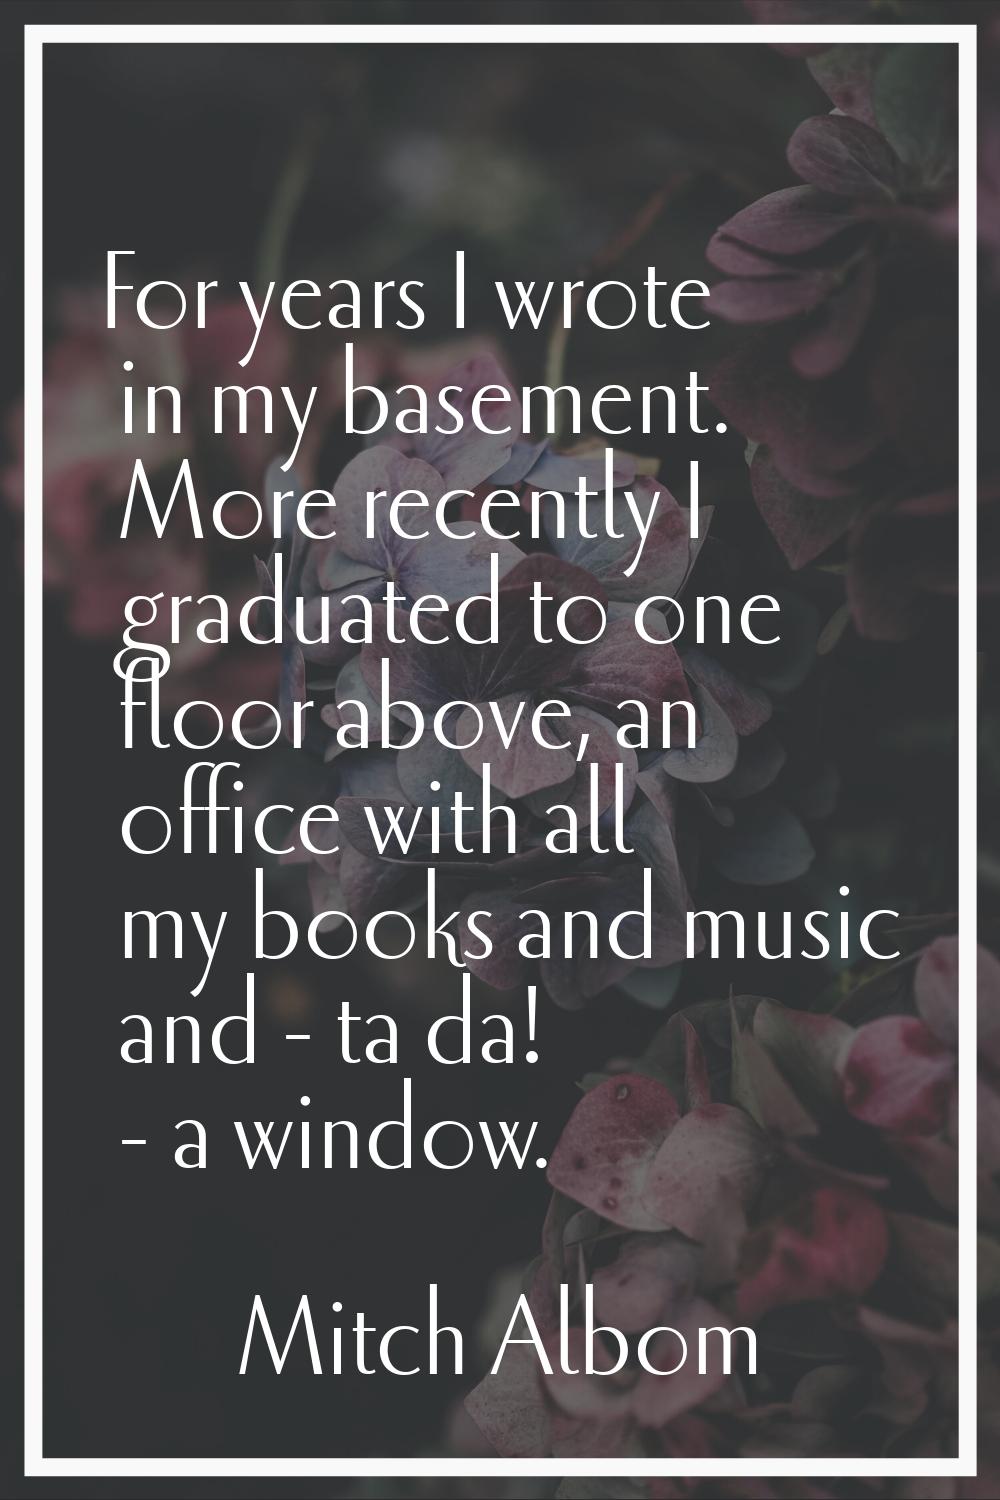 For years I wrote in my basement. More recently I graduated to one floor above, an office with all 